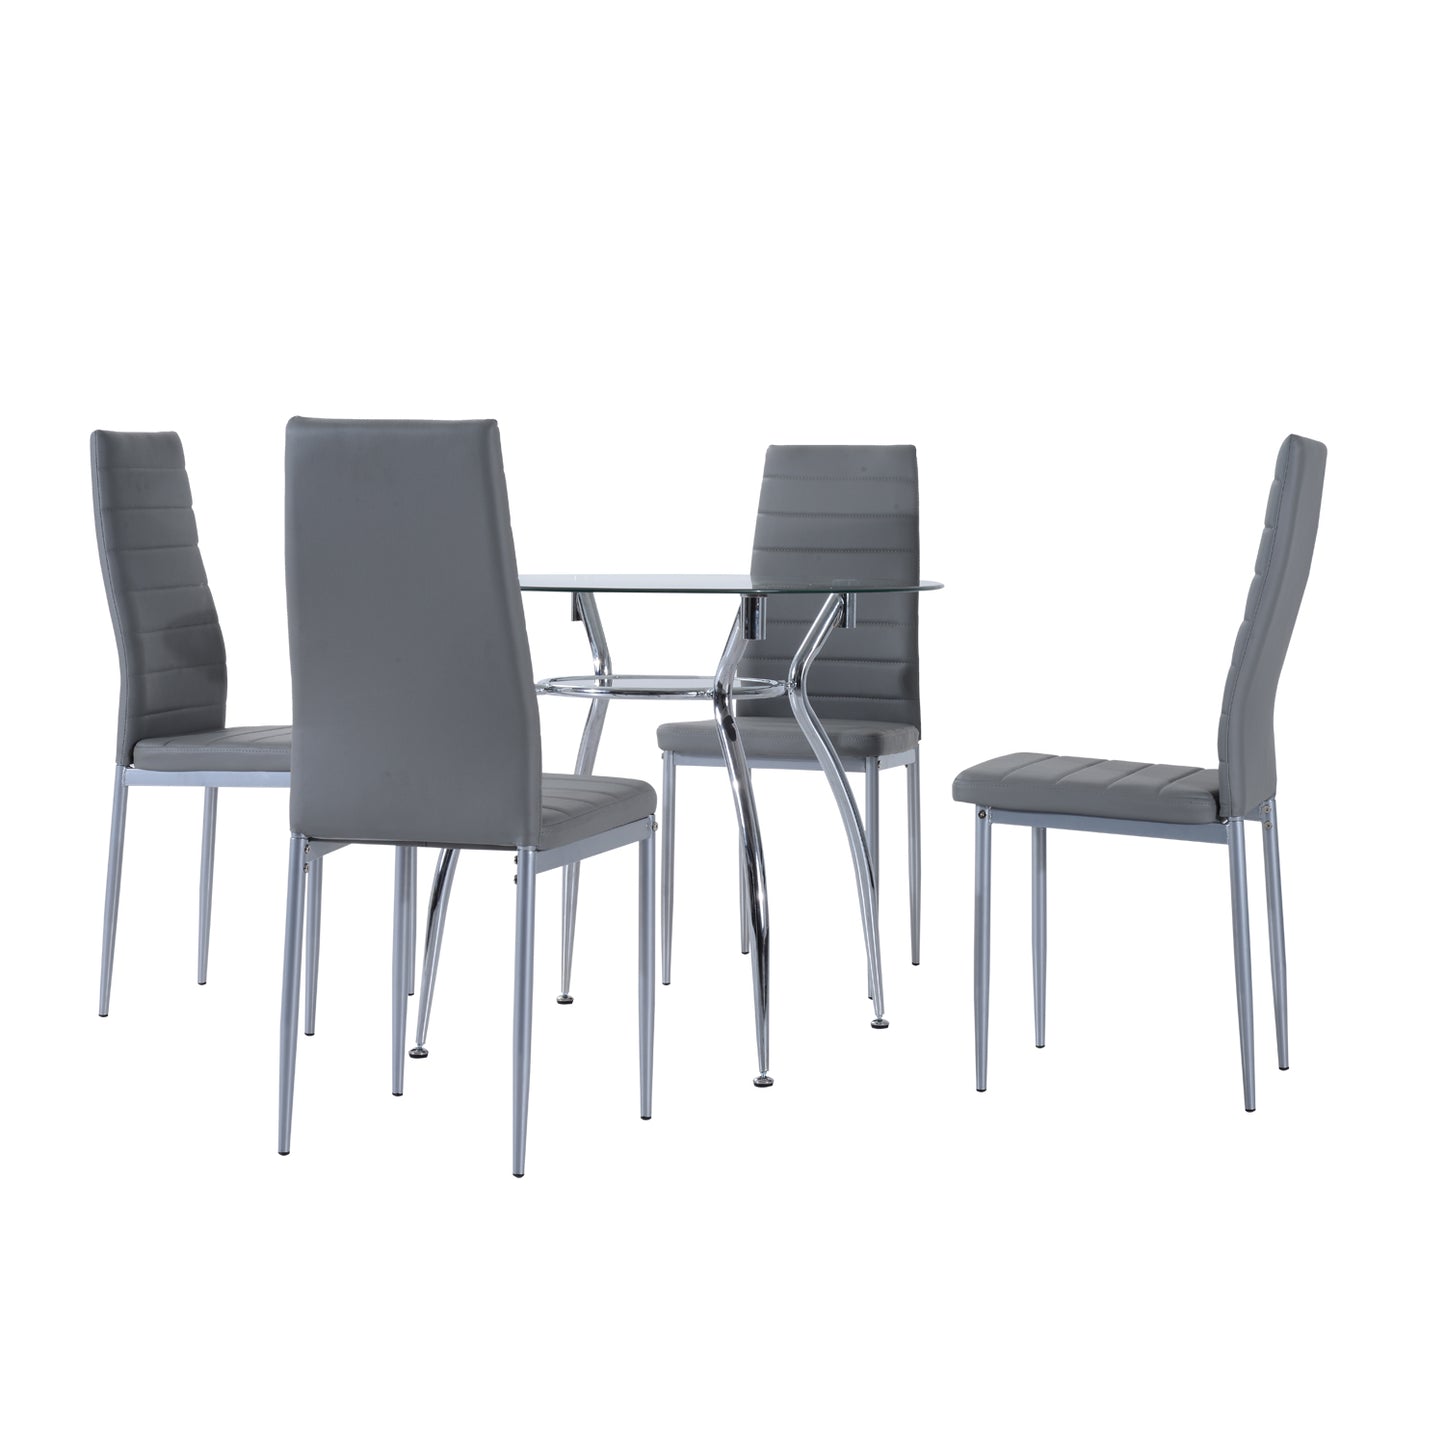 HOMCOM 5 pc Dining Set Kitchen Table and Chairs,Tempered Glass, PVC, Metal-Grey